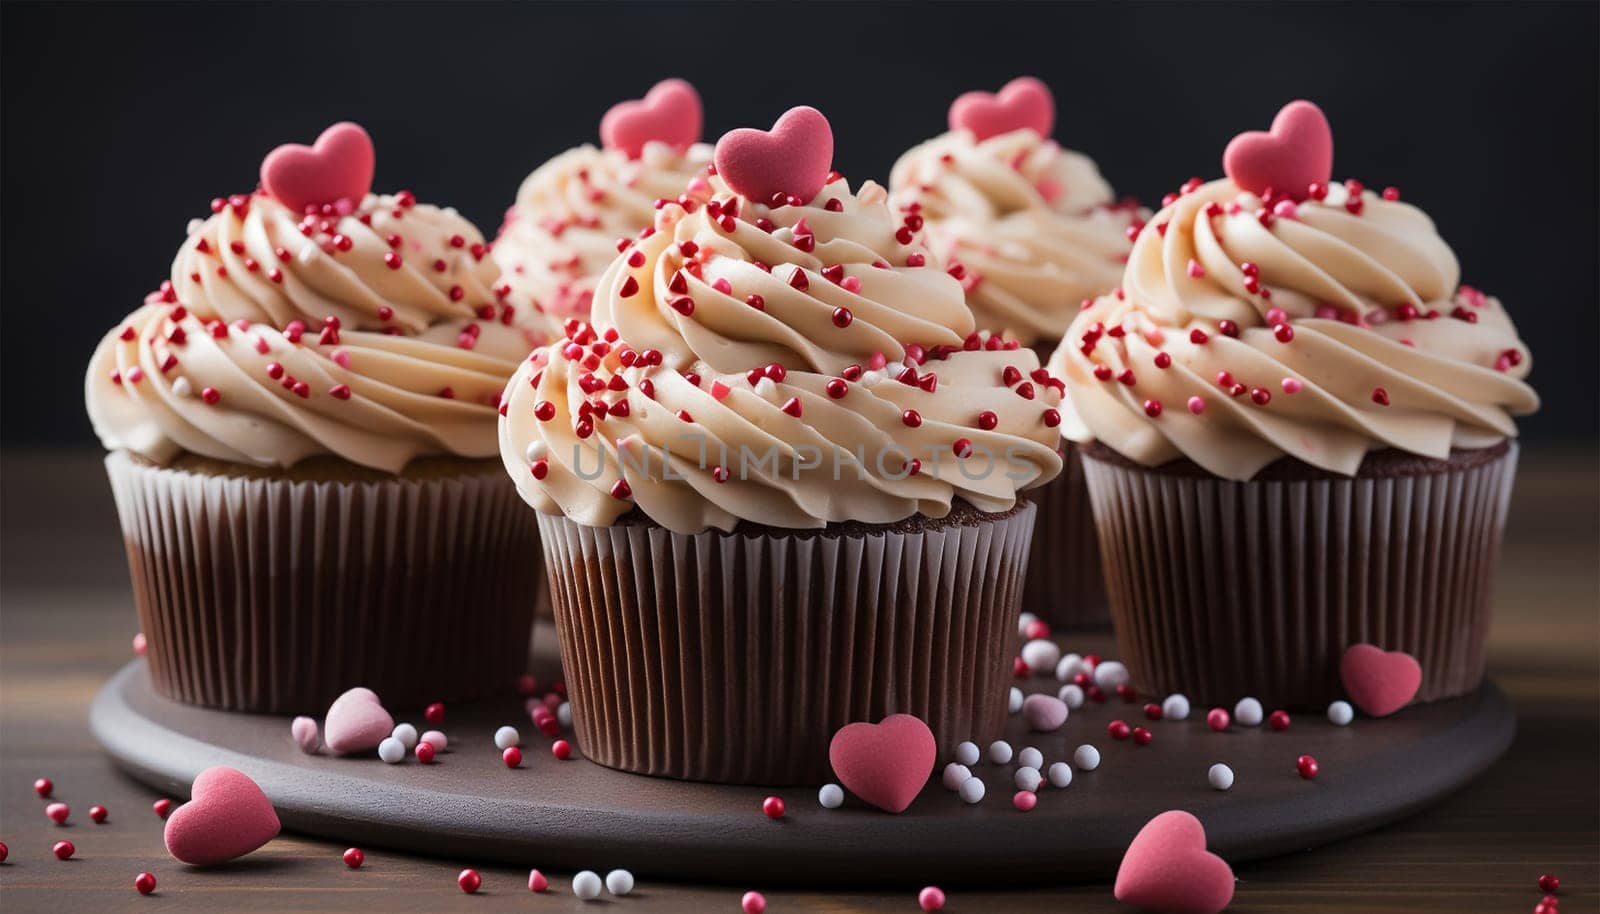 Festive cupcakes with a heart inside for Valentine's Day decorated with sprinkles with hearts. Love concept. Selective focus. Delicious sweets Valentine's Day Copy space